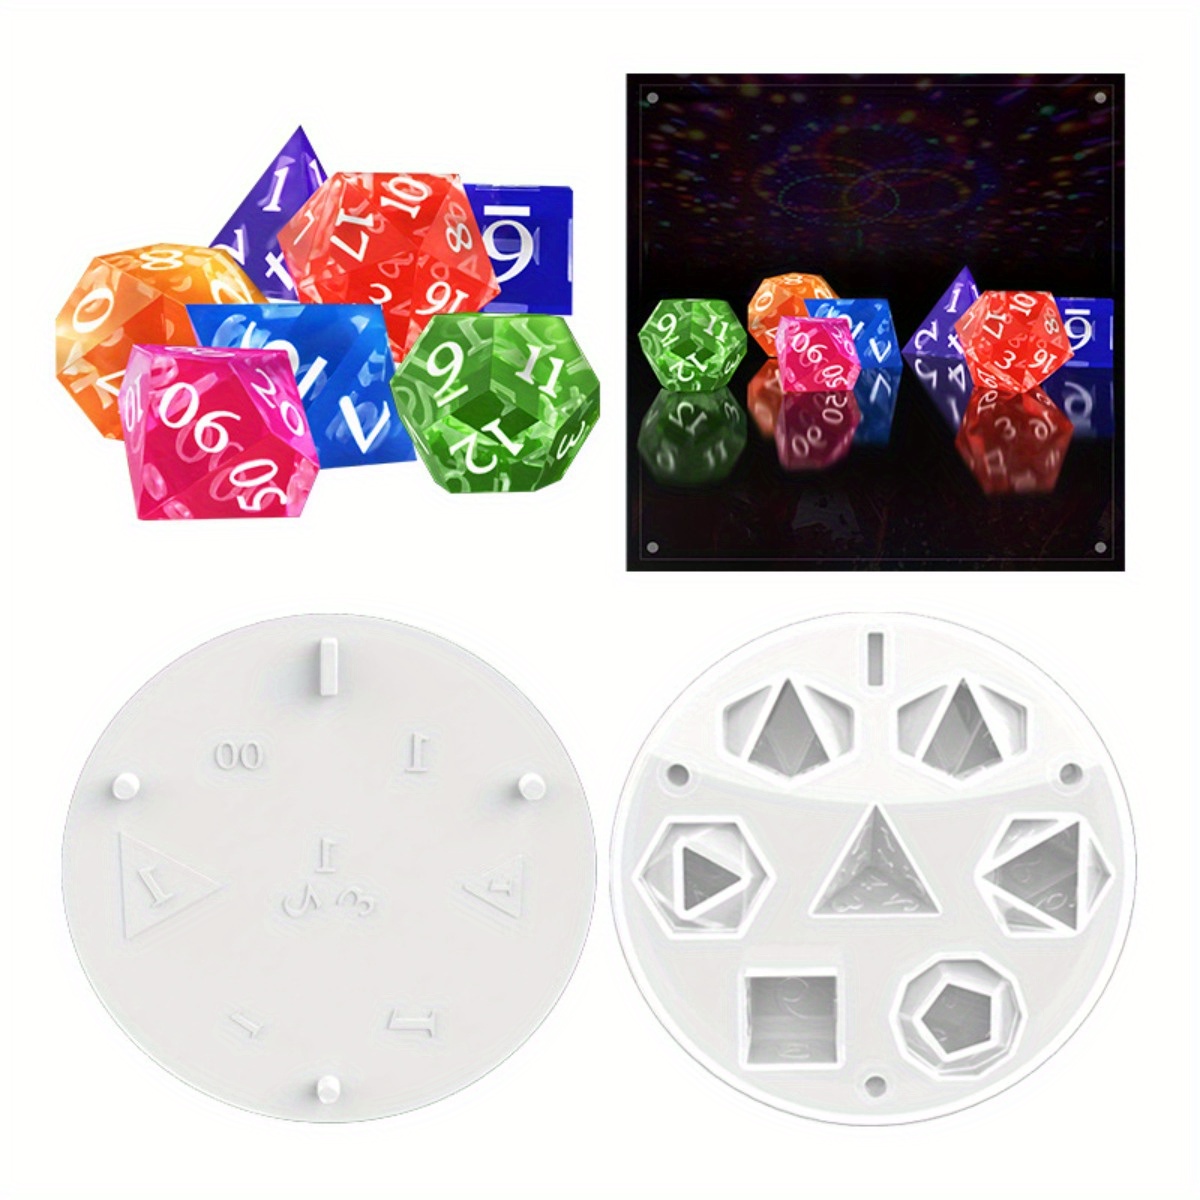 Dice Molds for Resin, Set of 2 Extra Large Resin Molds Silicone 4inch,  Jumbo D20 D8 Dice Molds with Number, Silicone Molds for Epoxy Resin, Dice  Collection, Night Light, Christmas Gift